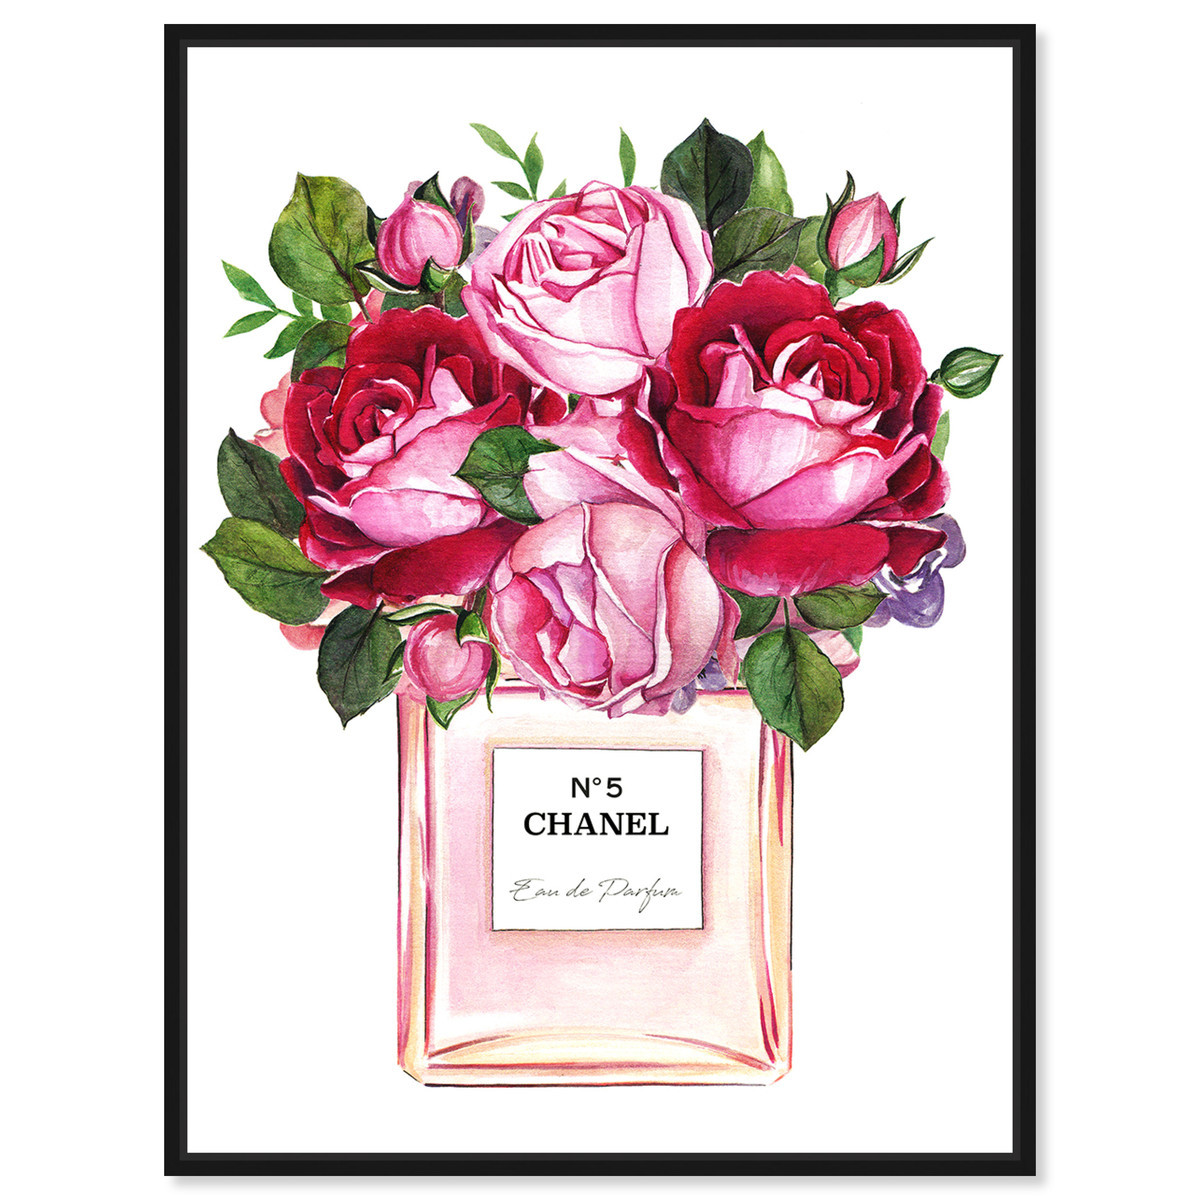 Fashion and Glam Doll Memories - Rose Scent Square Perfumes - Graphic Art Print on Canvas Rosdorf Park Size: 16 H x 16 W x 1.5 D, Format: Black Fra